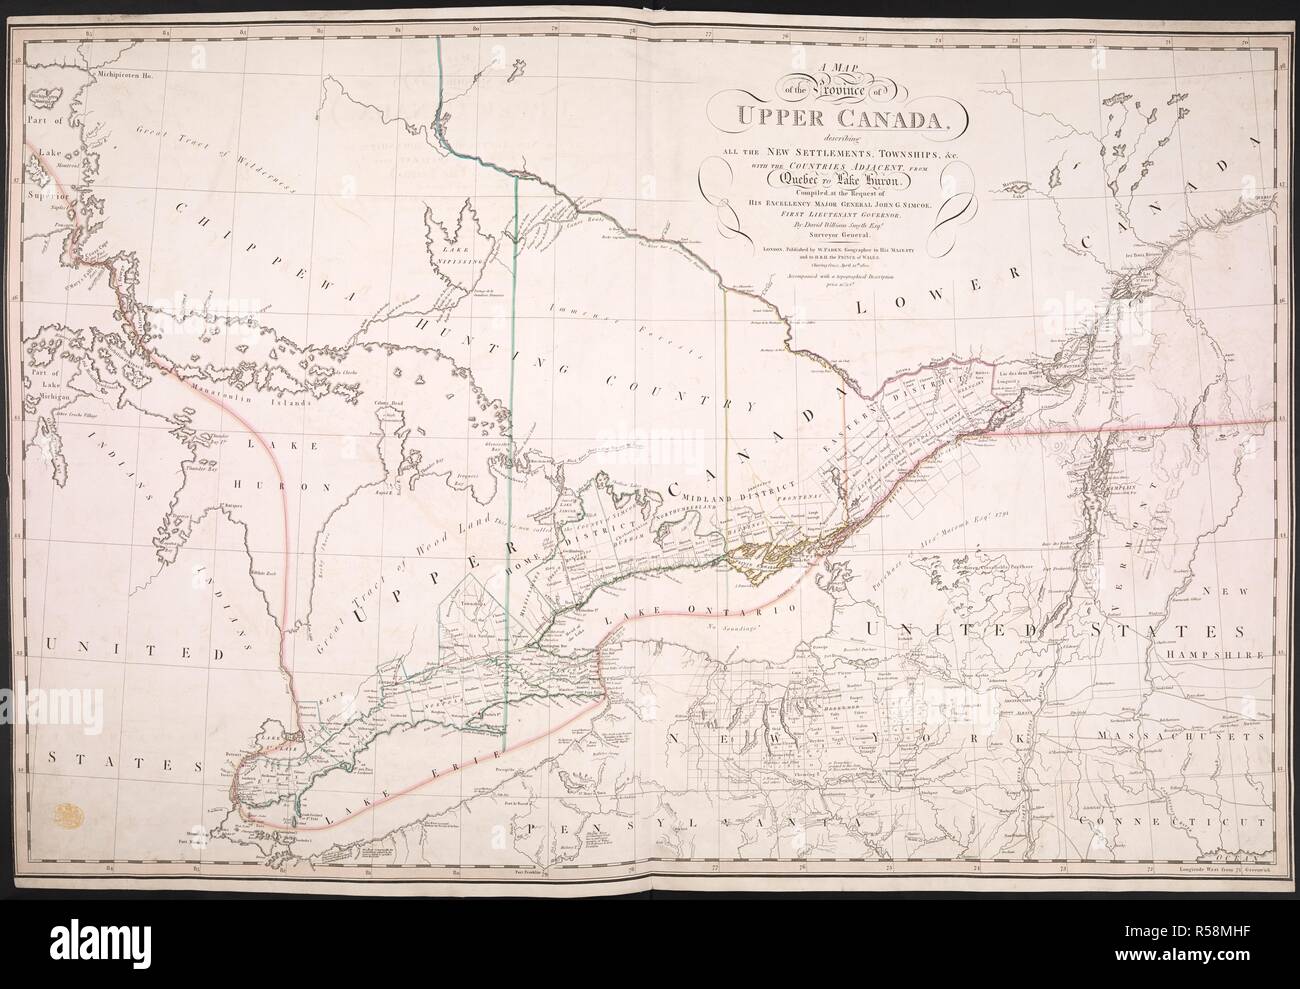 A map of the Province of Upper Canada. A Map of the Province of Upper Canada describing all the new settlements, townships, &c., with the countries adjacent, from Quebec to Lake Huron. London : W. Faden, April 12th, 1800. Source: Maps K.Top.119.13. Language: English. Stock Photo